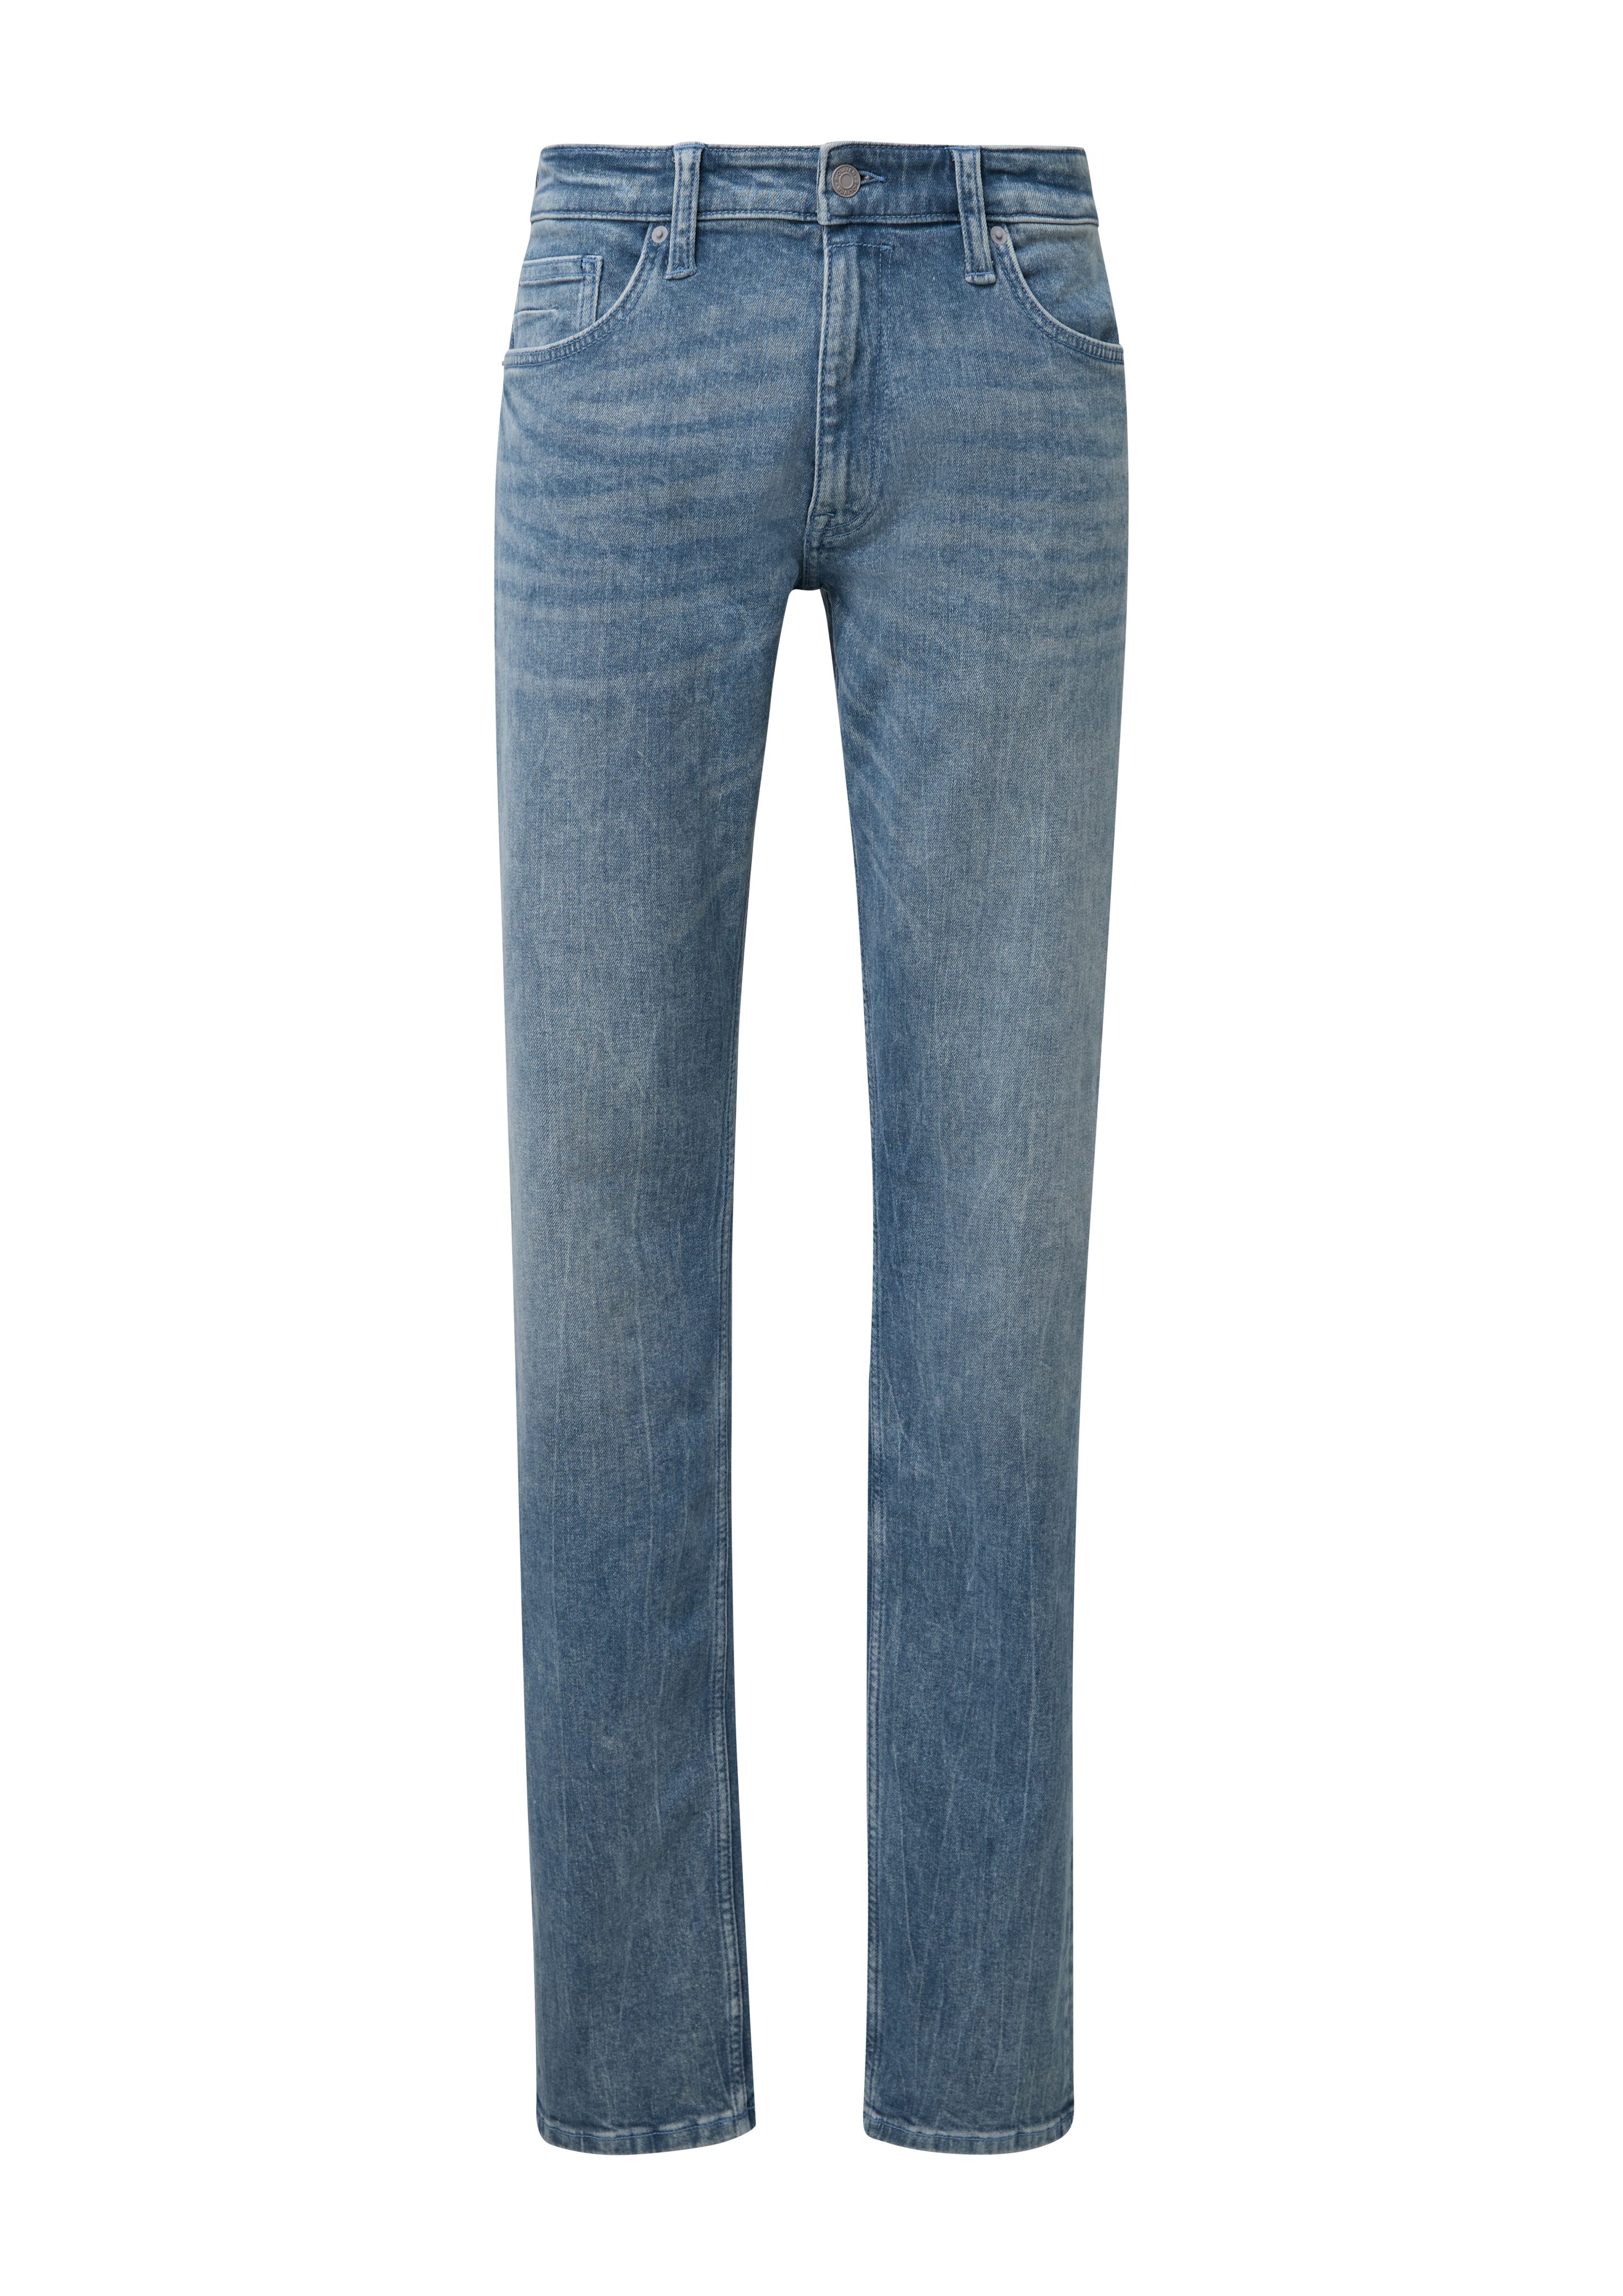 s.Oliver Stoffhose Jeans Leg / Straight Mid York / Rise Fit Regular / Label-Patch